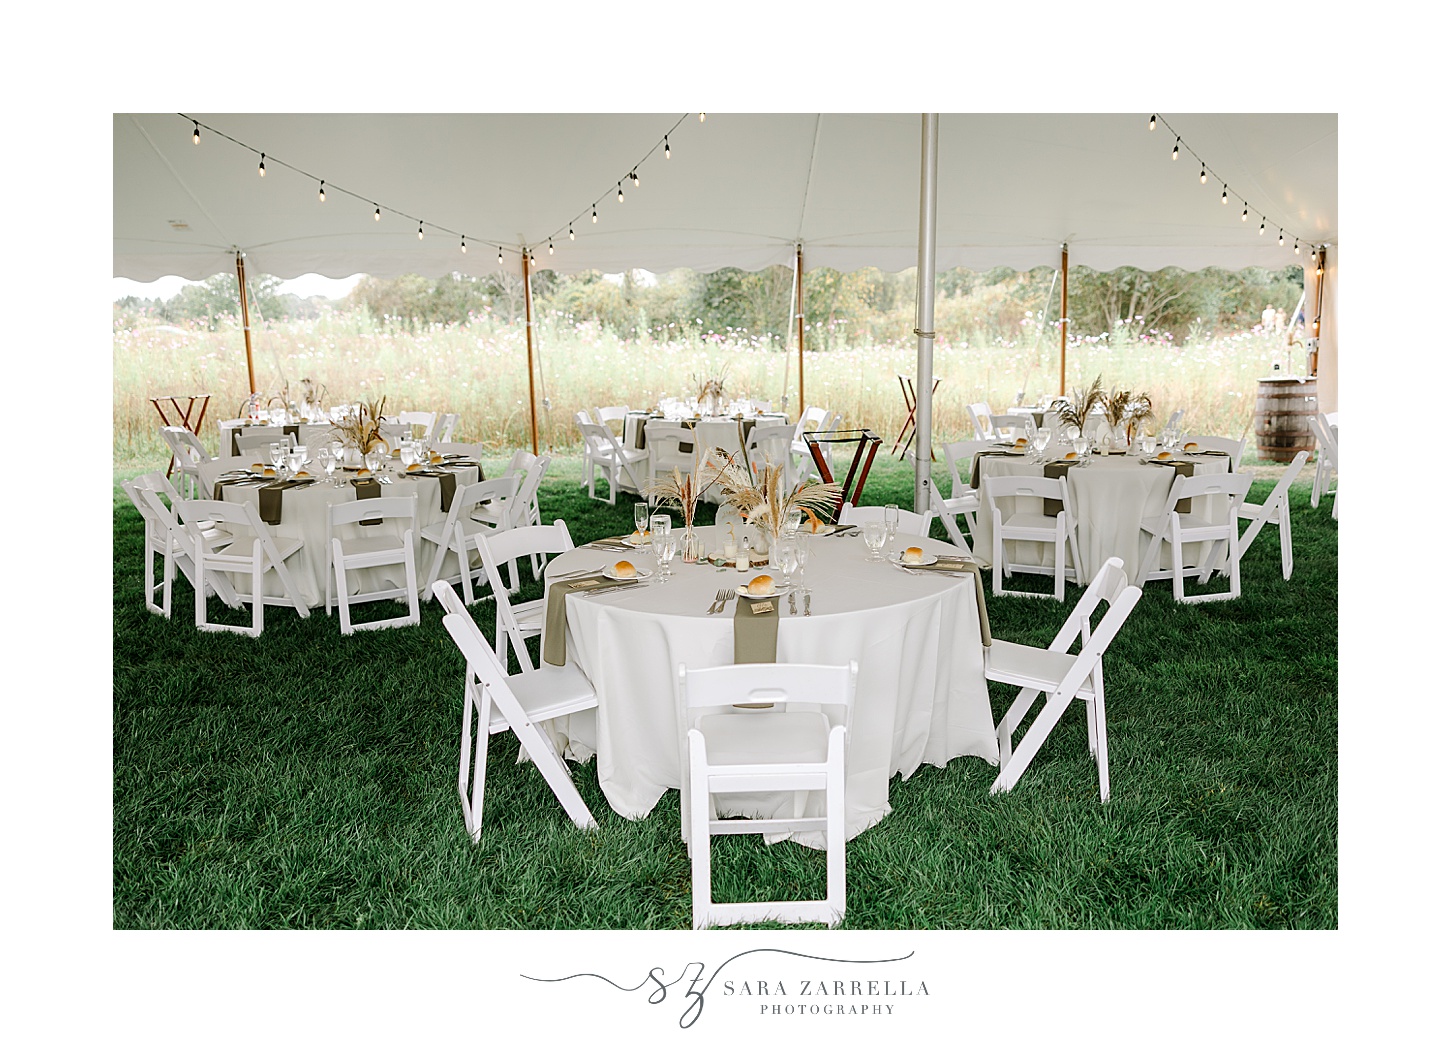 tented reception on lawn of Rhode Island private residence with white chairs and lighting